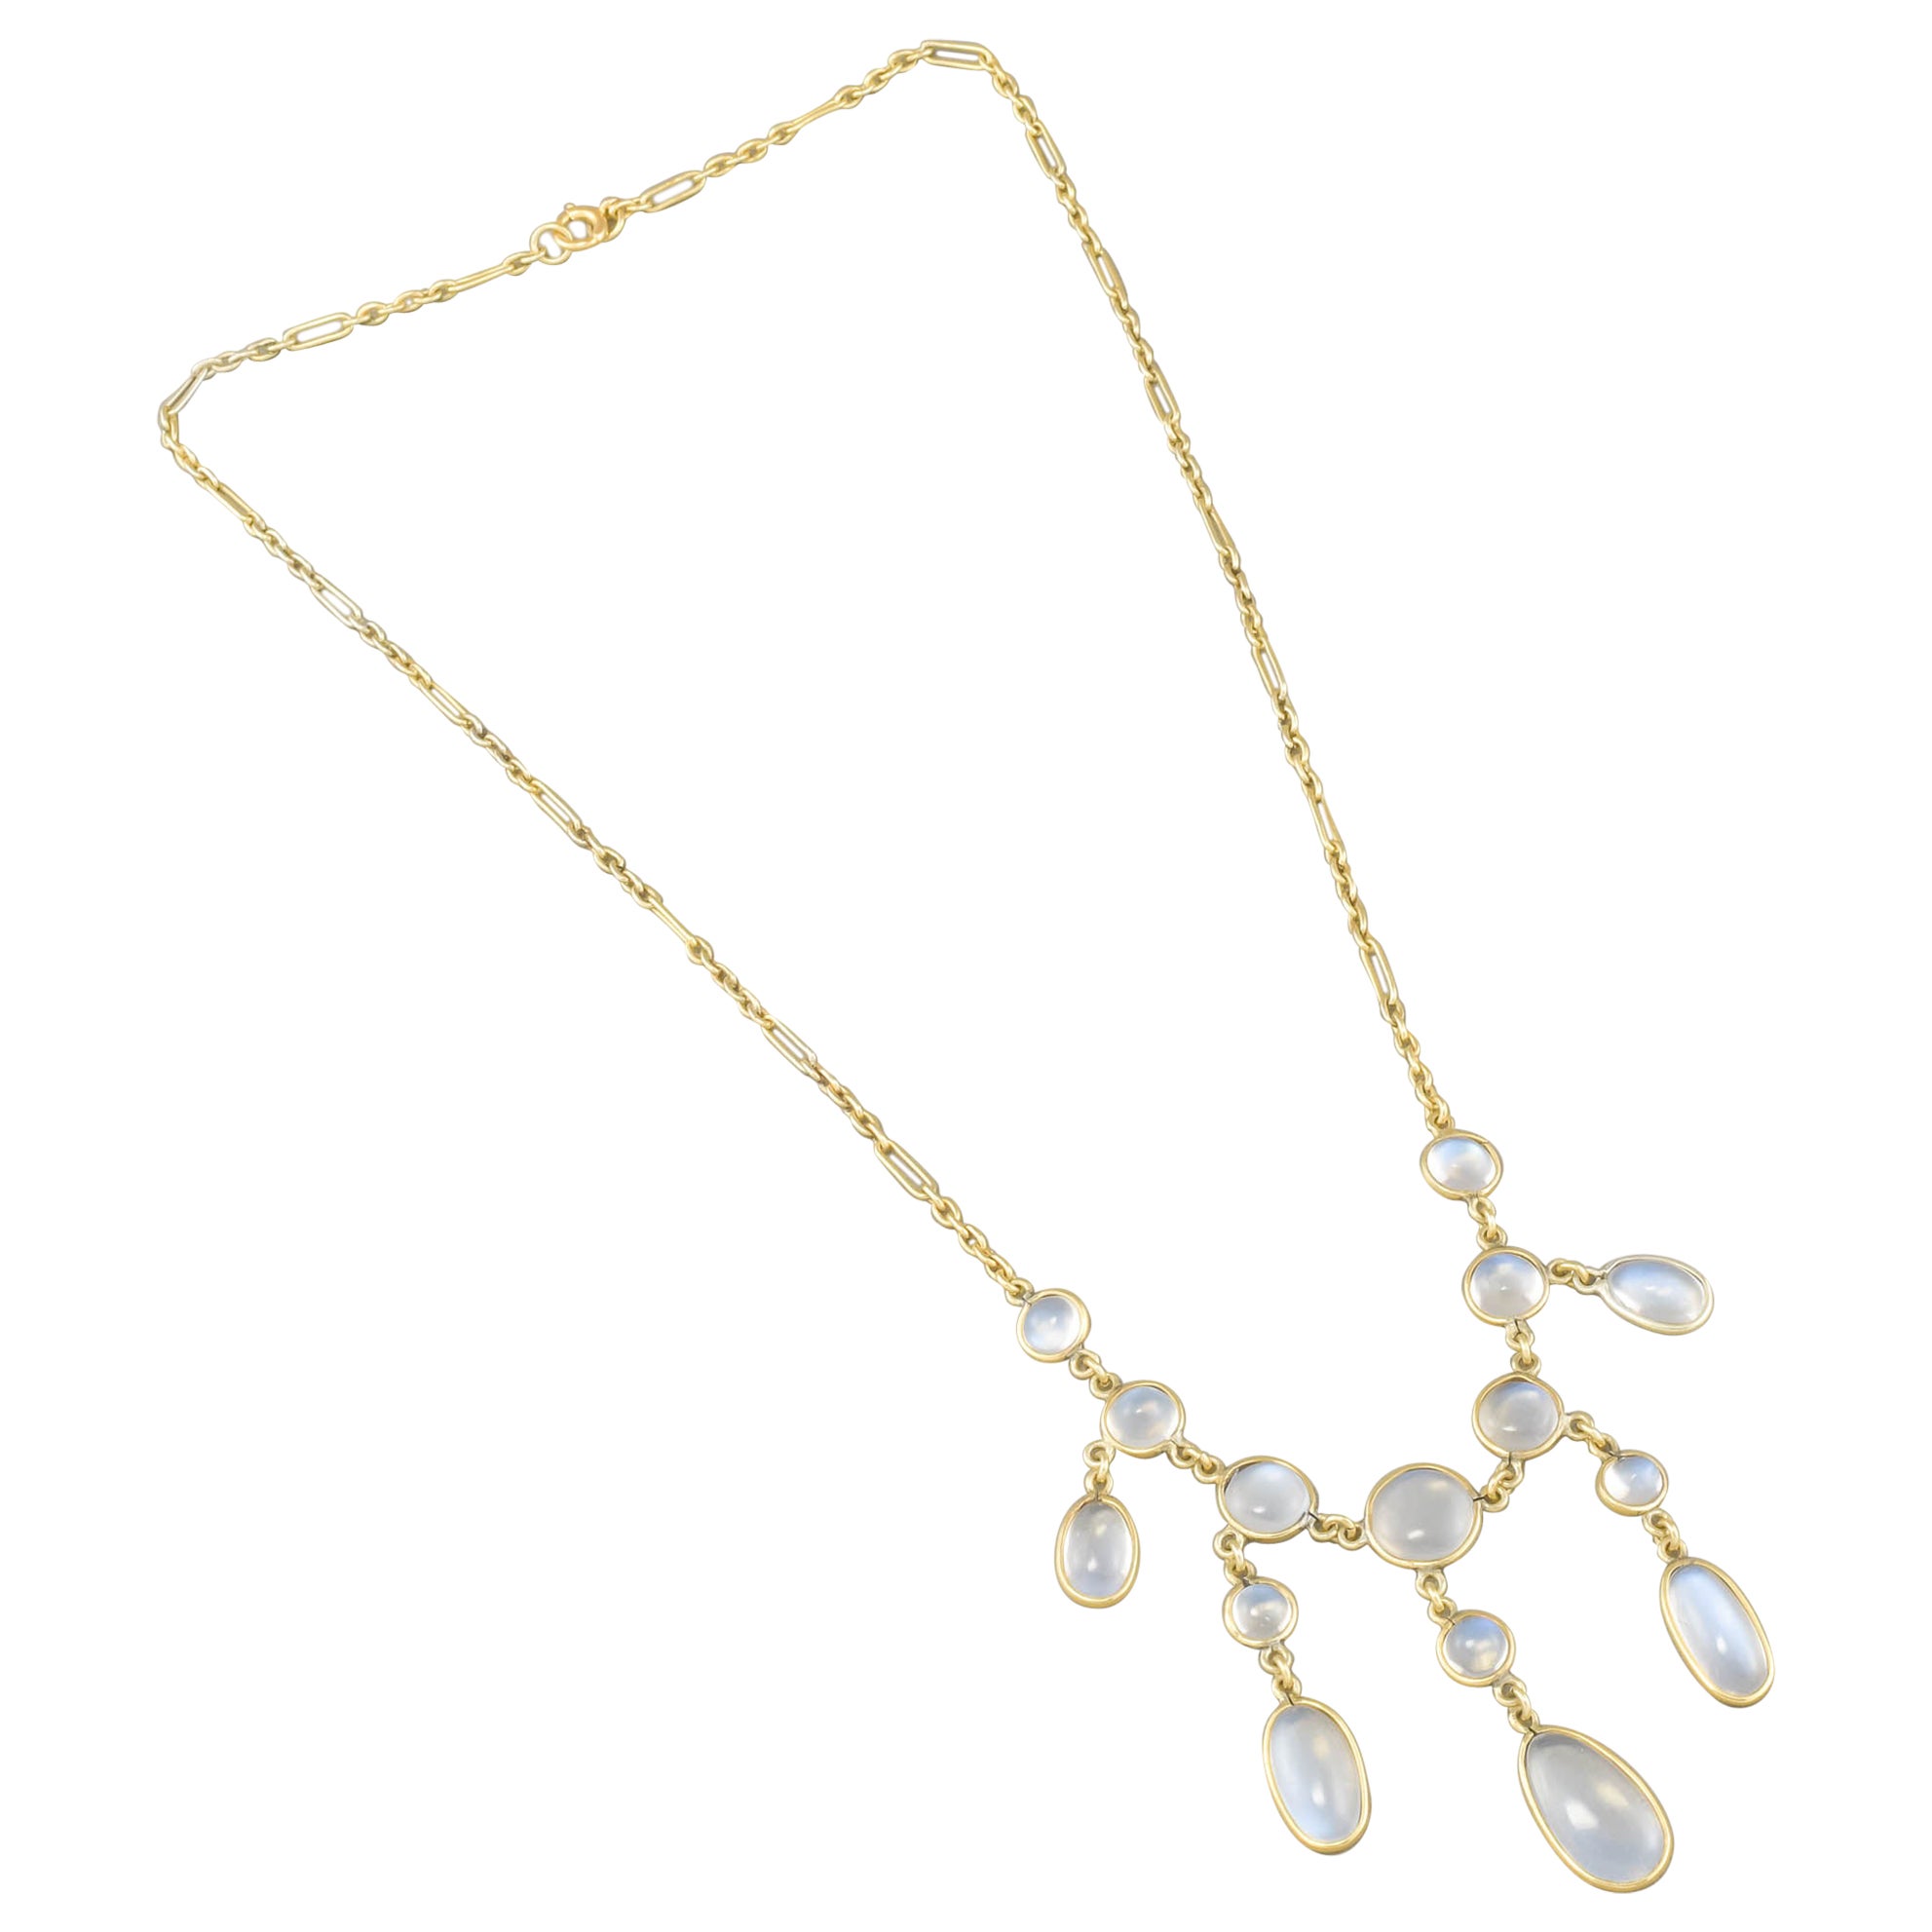 Antique 15K Gold Moonstone Drop Necklace with Fancy Link Chain For Sale